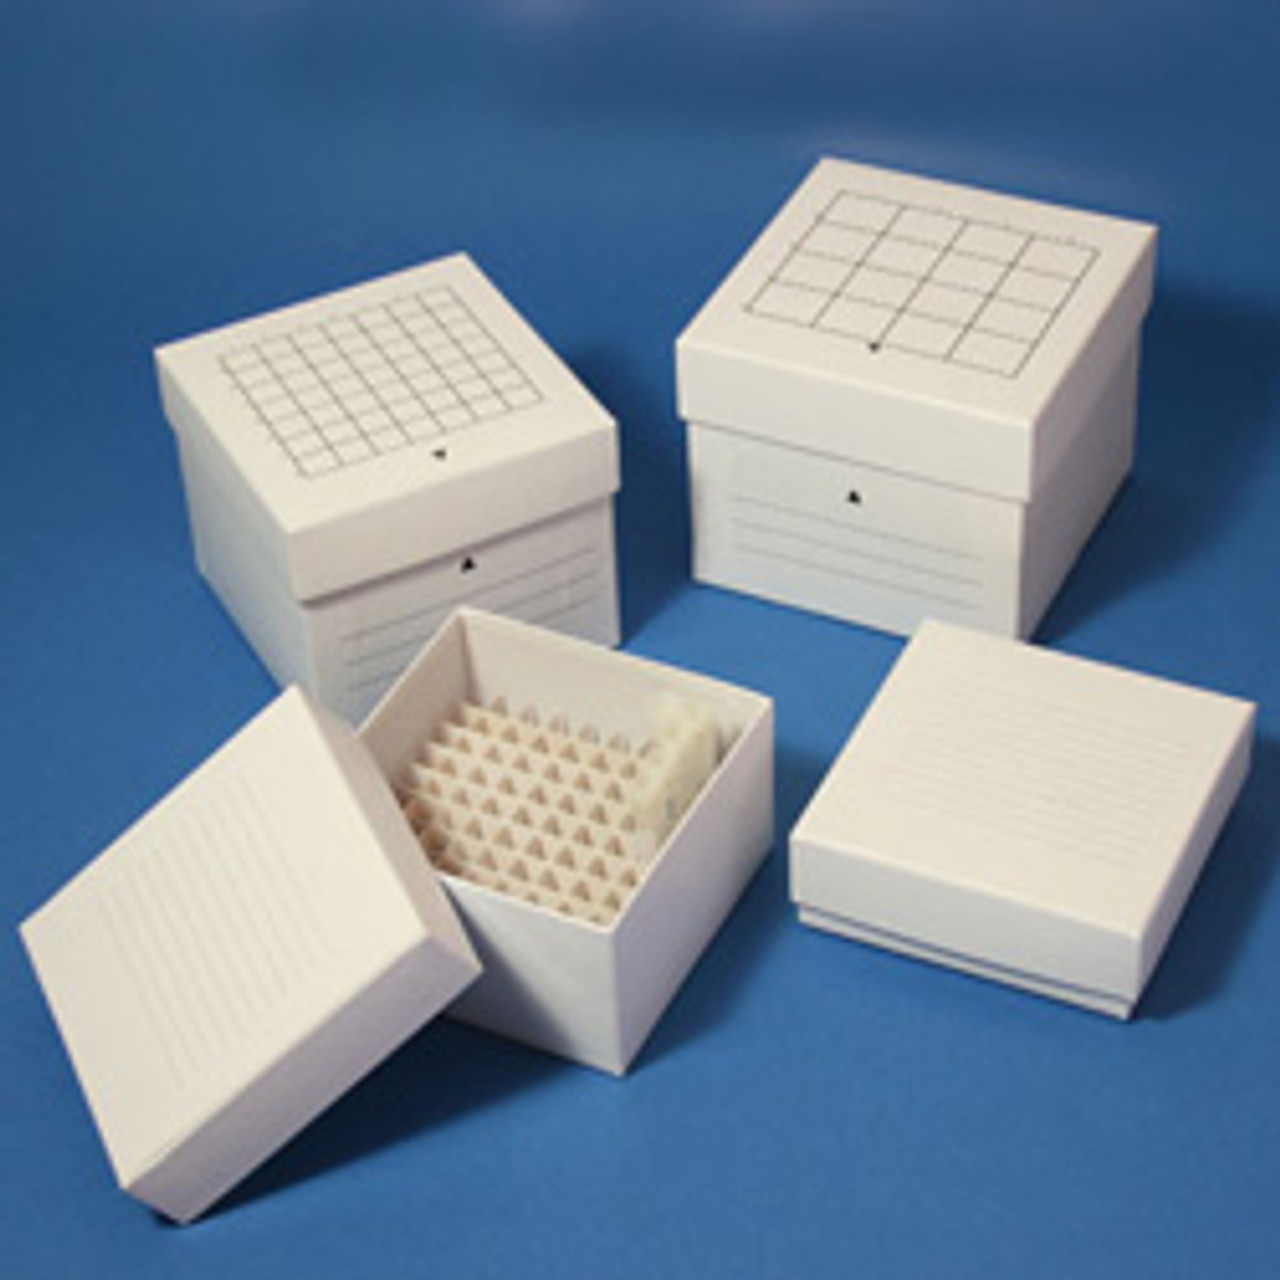 Stellar Scientific Carboard Cryo Freezer Boxes for 15mL Tubes with